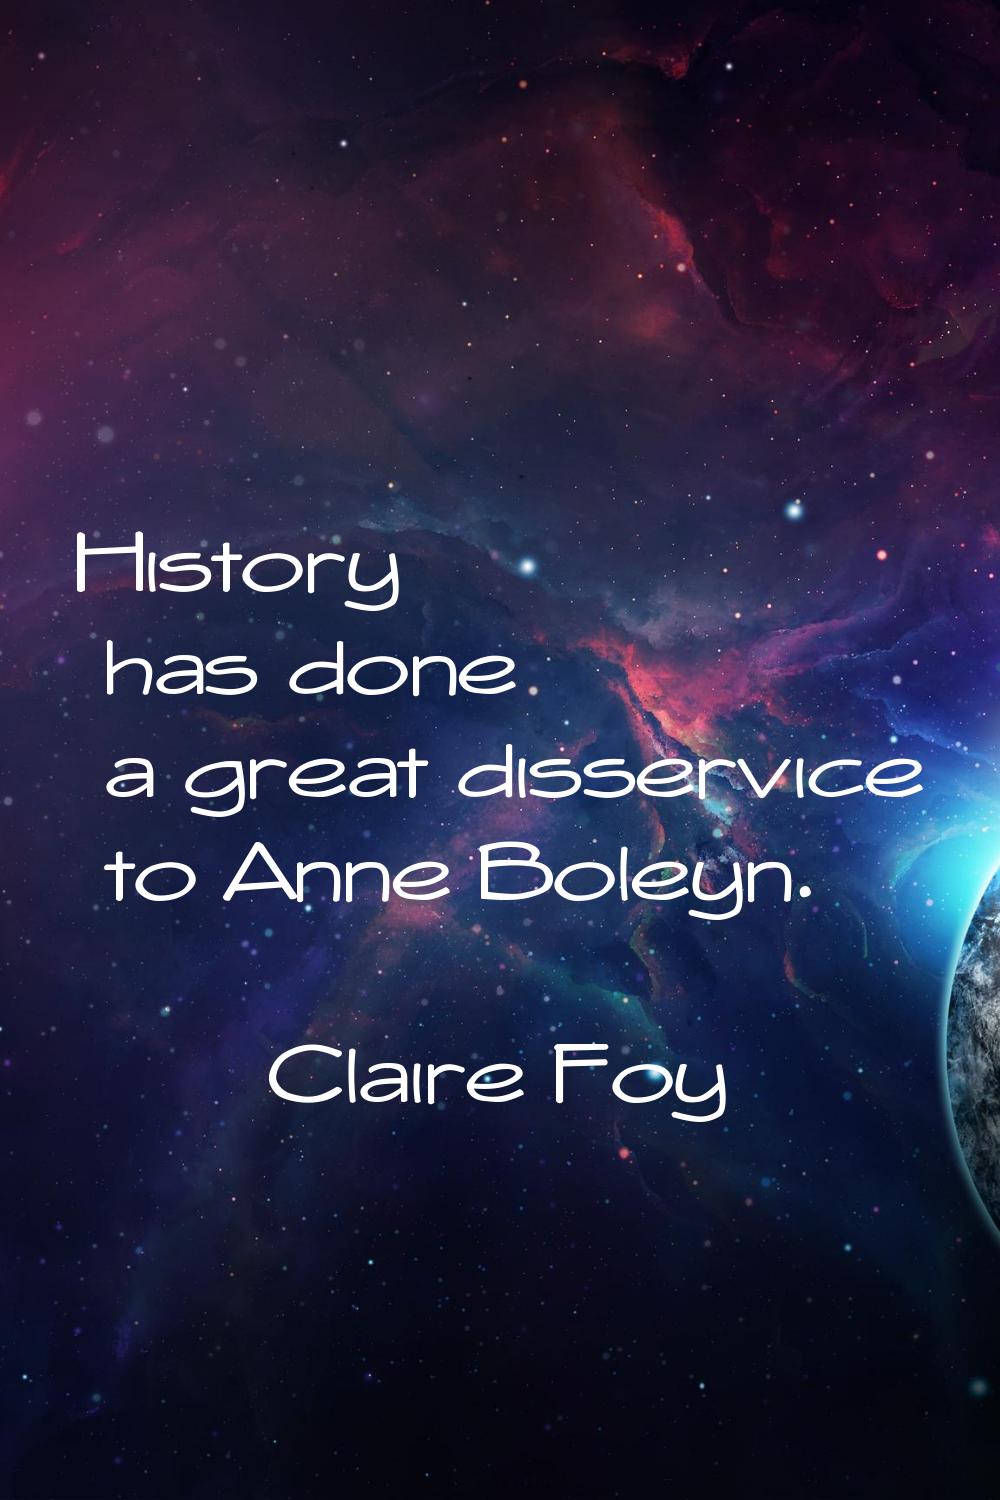 History has done a great disservice to Anne Boleyn.